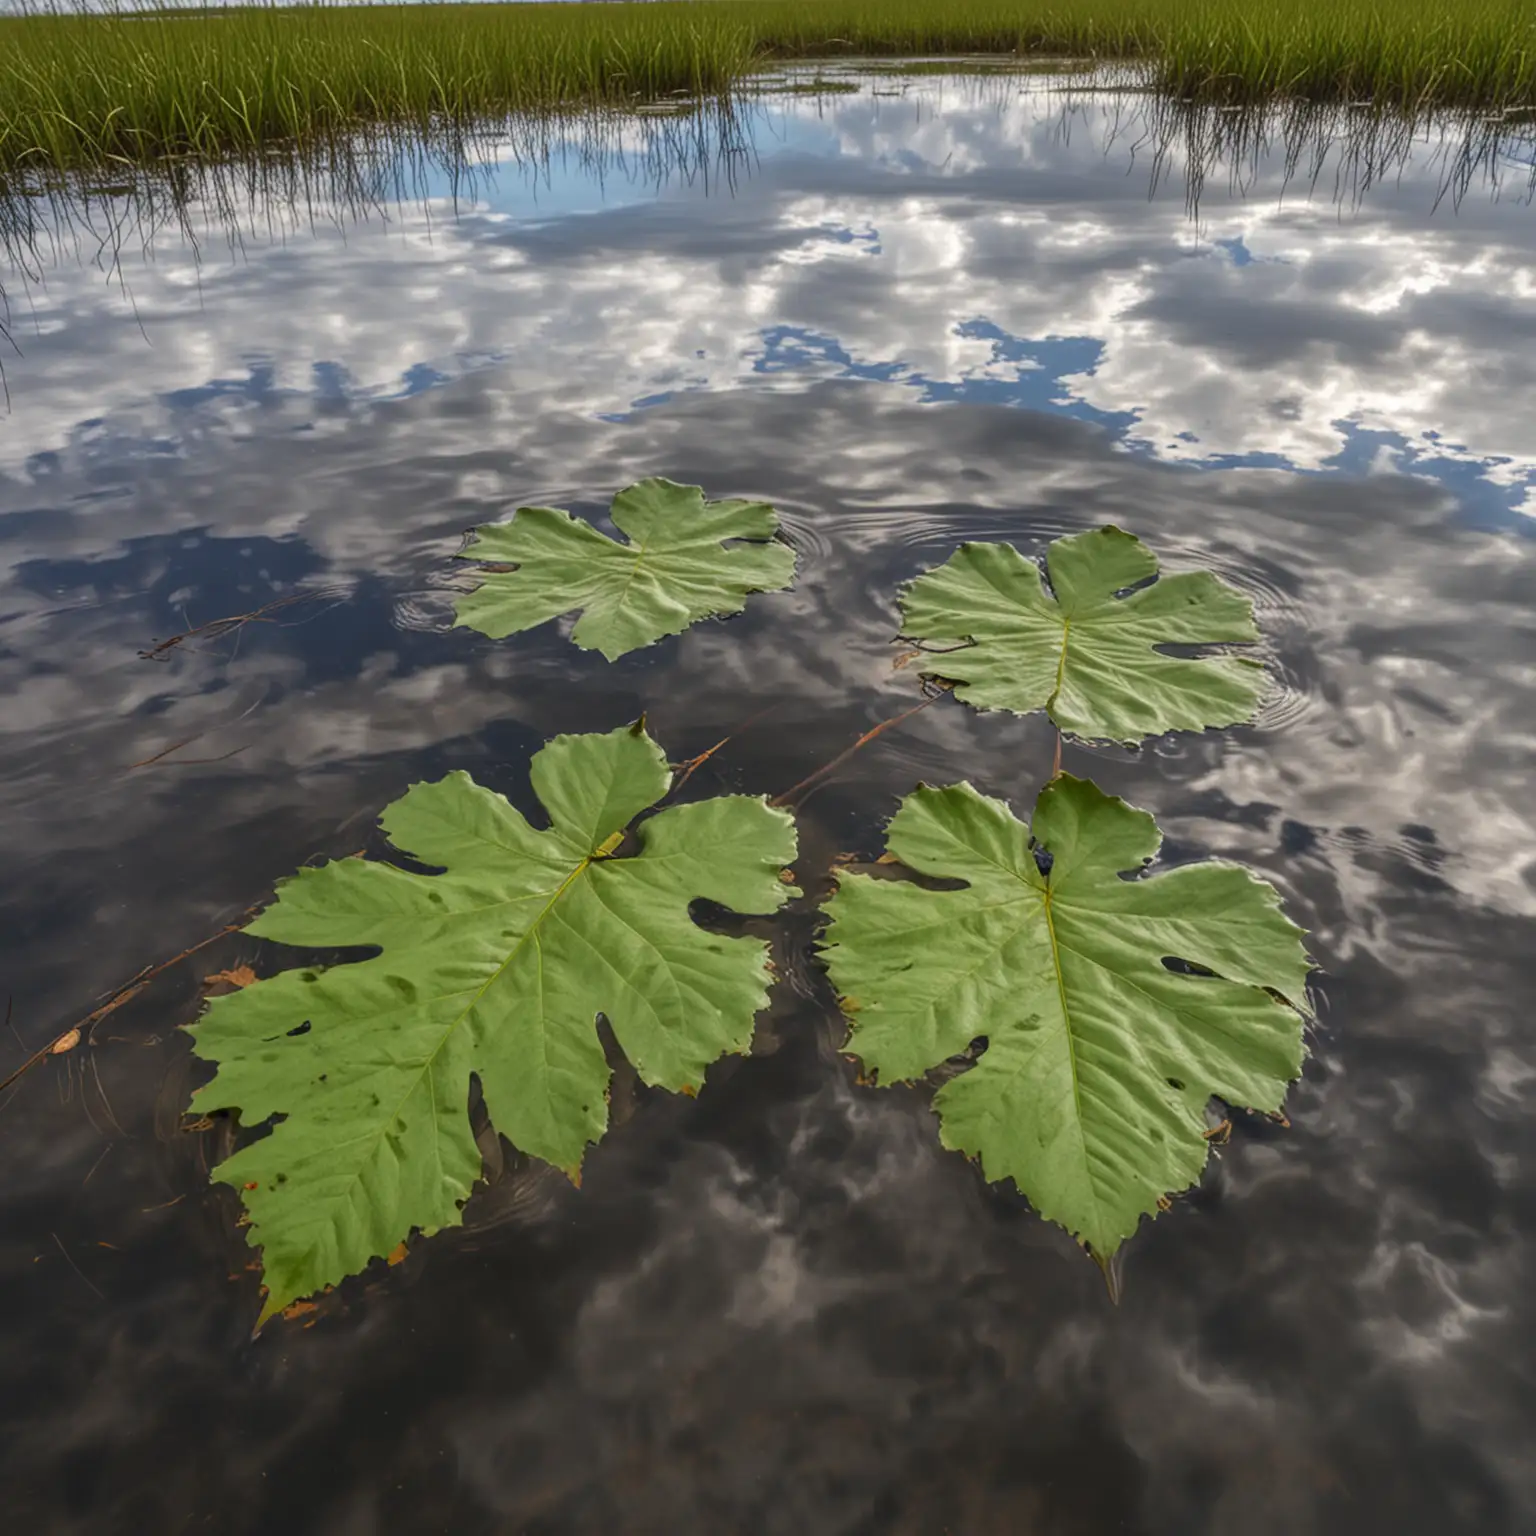 Reflection of Three Large Leaves in Wavy Water Surrounded by Swampy Land